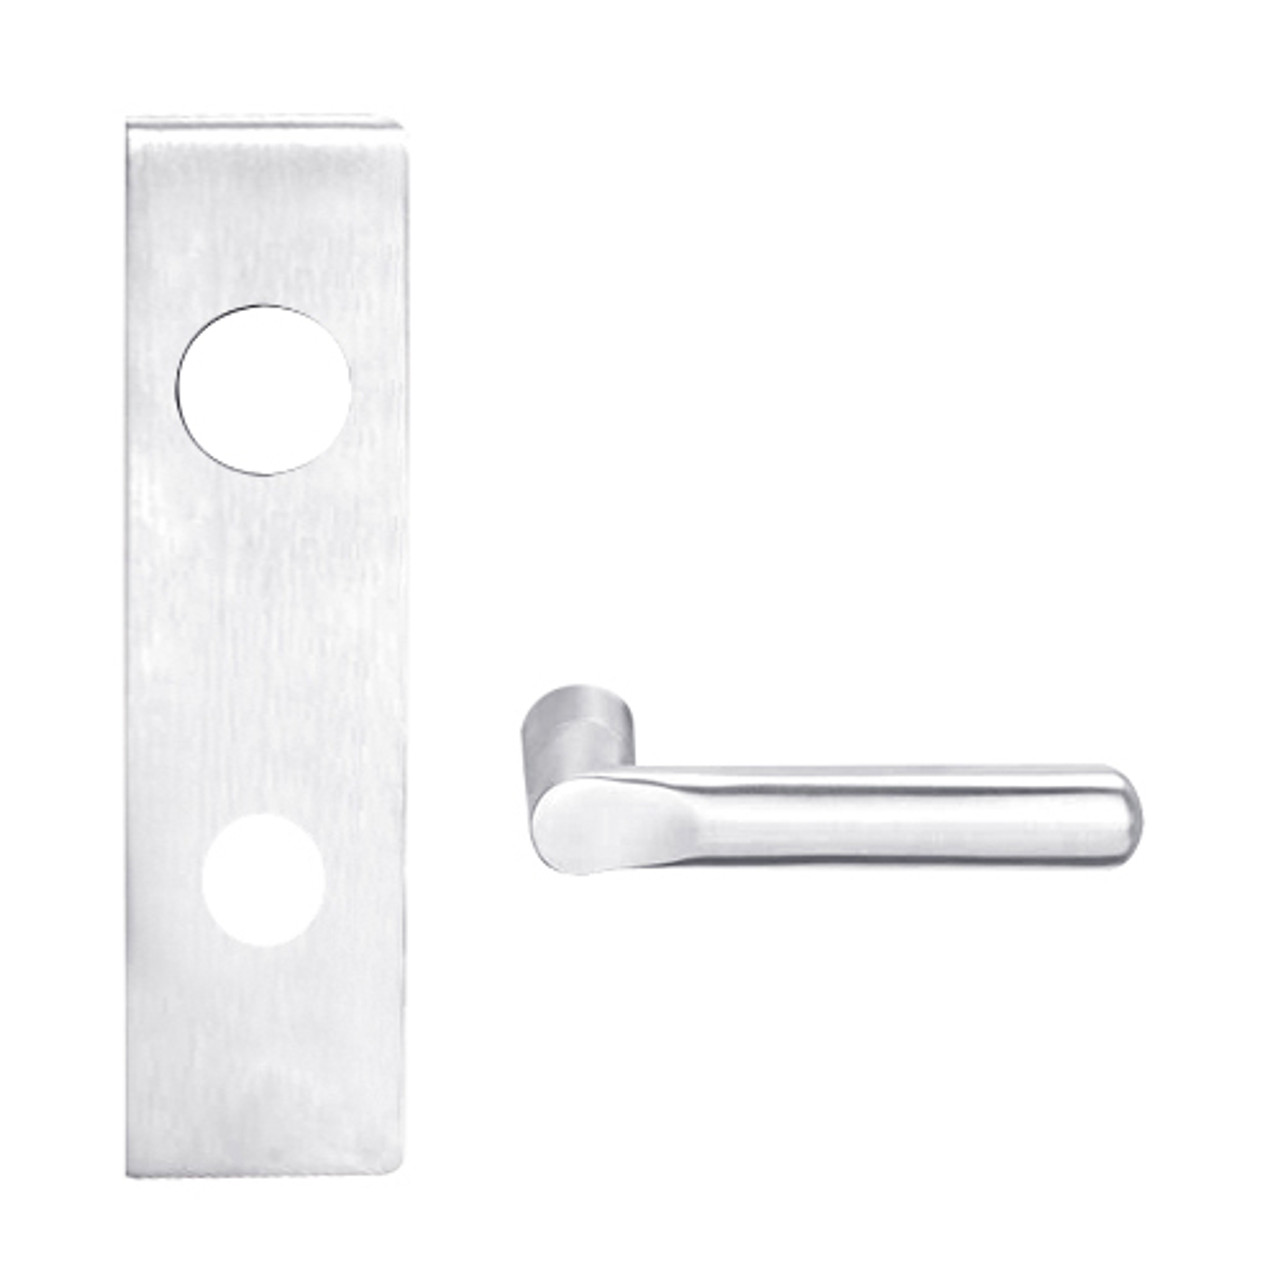 L9050J-18N-625 Schlage L Series Entrance Commercial Mortise Lock with 18 Cast Lever Design Prepped for FSIC in Bright Chrome